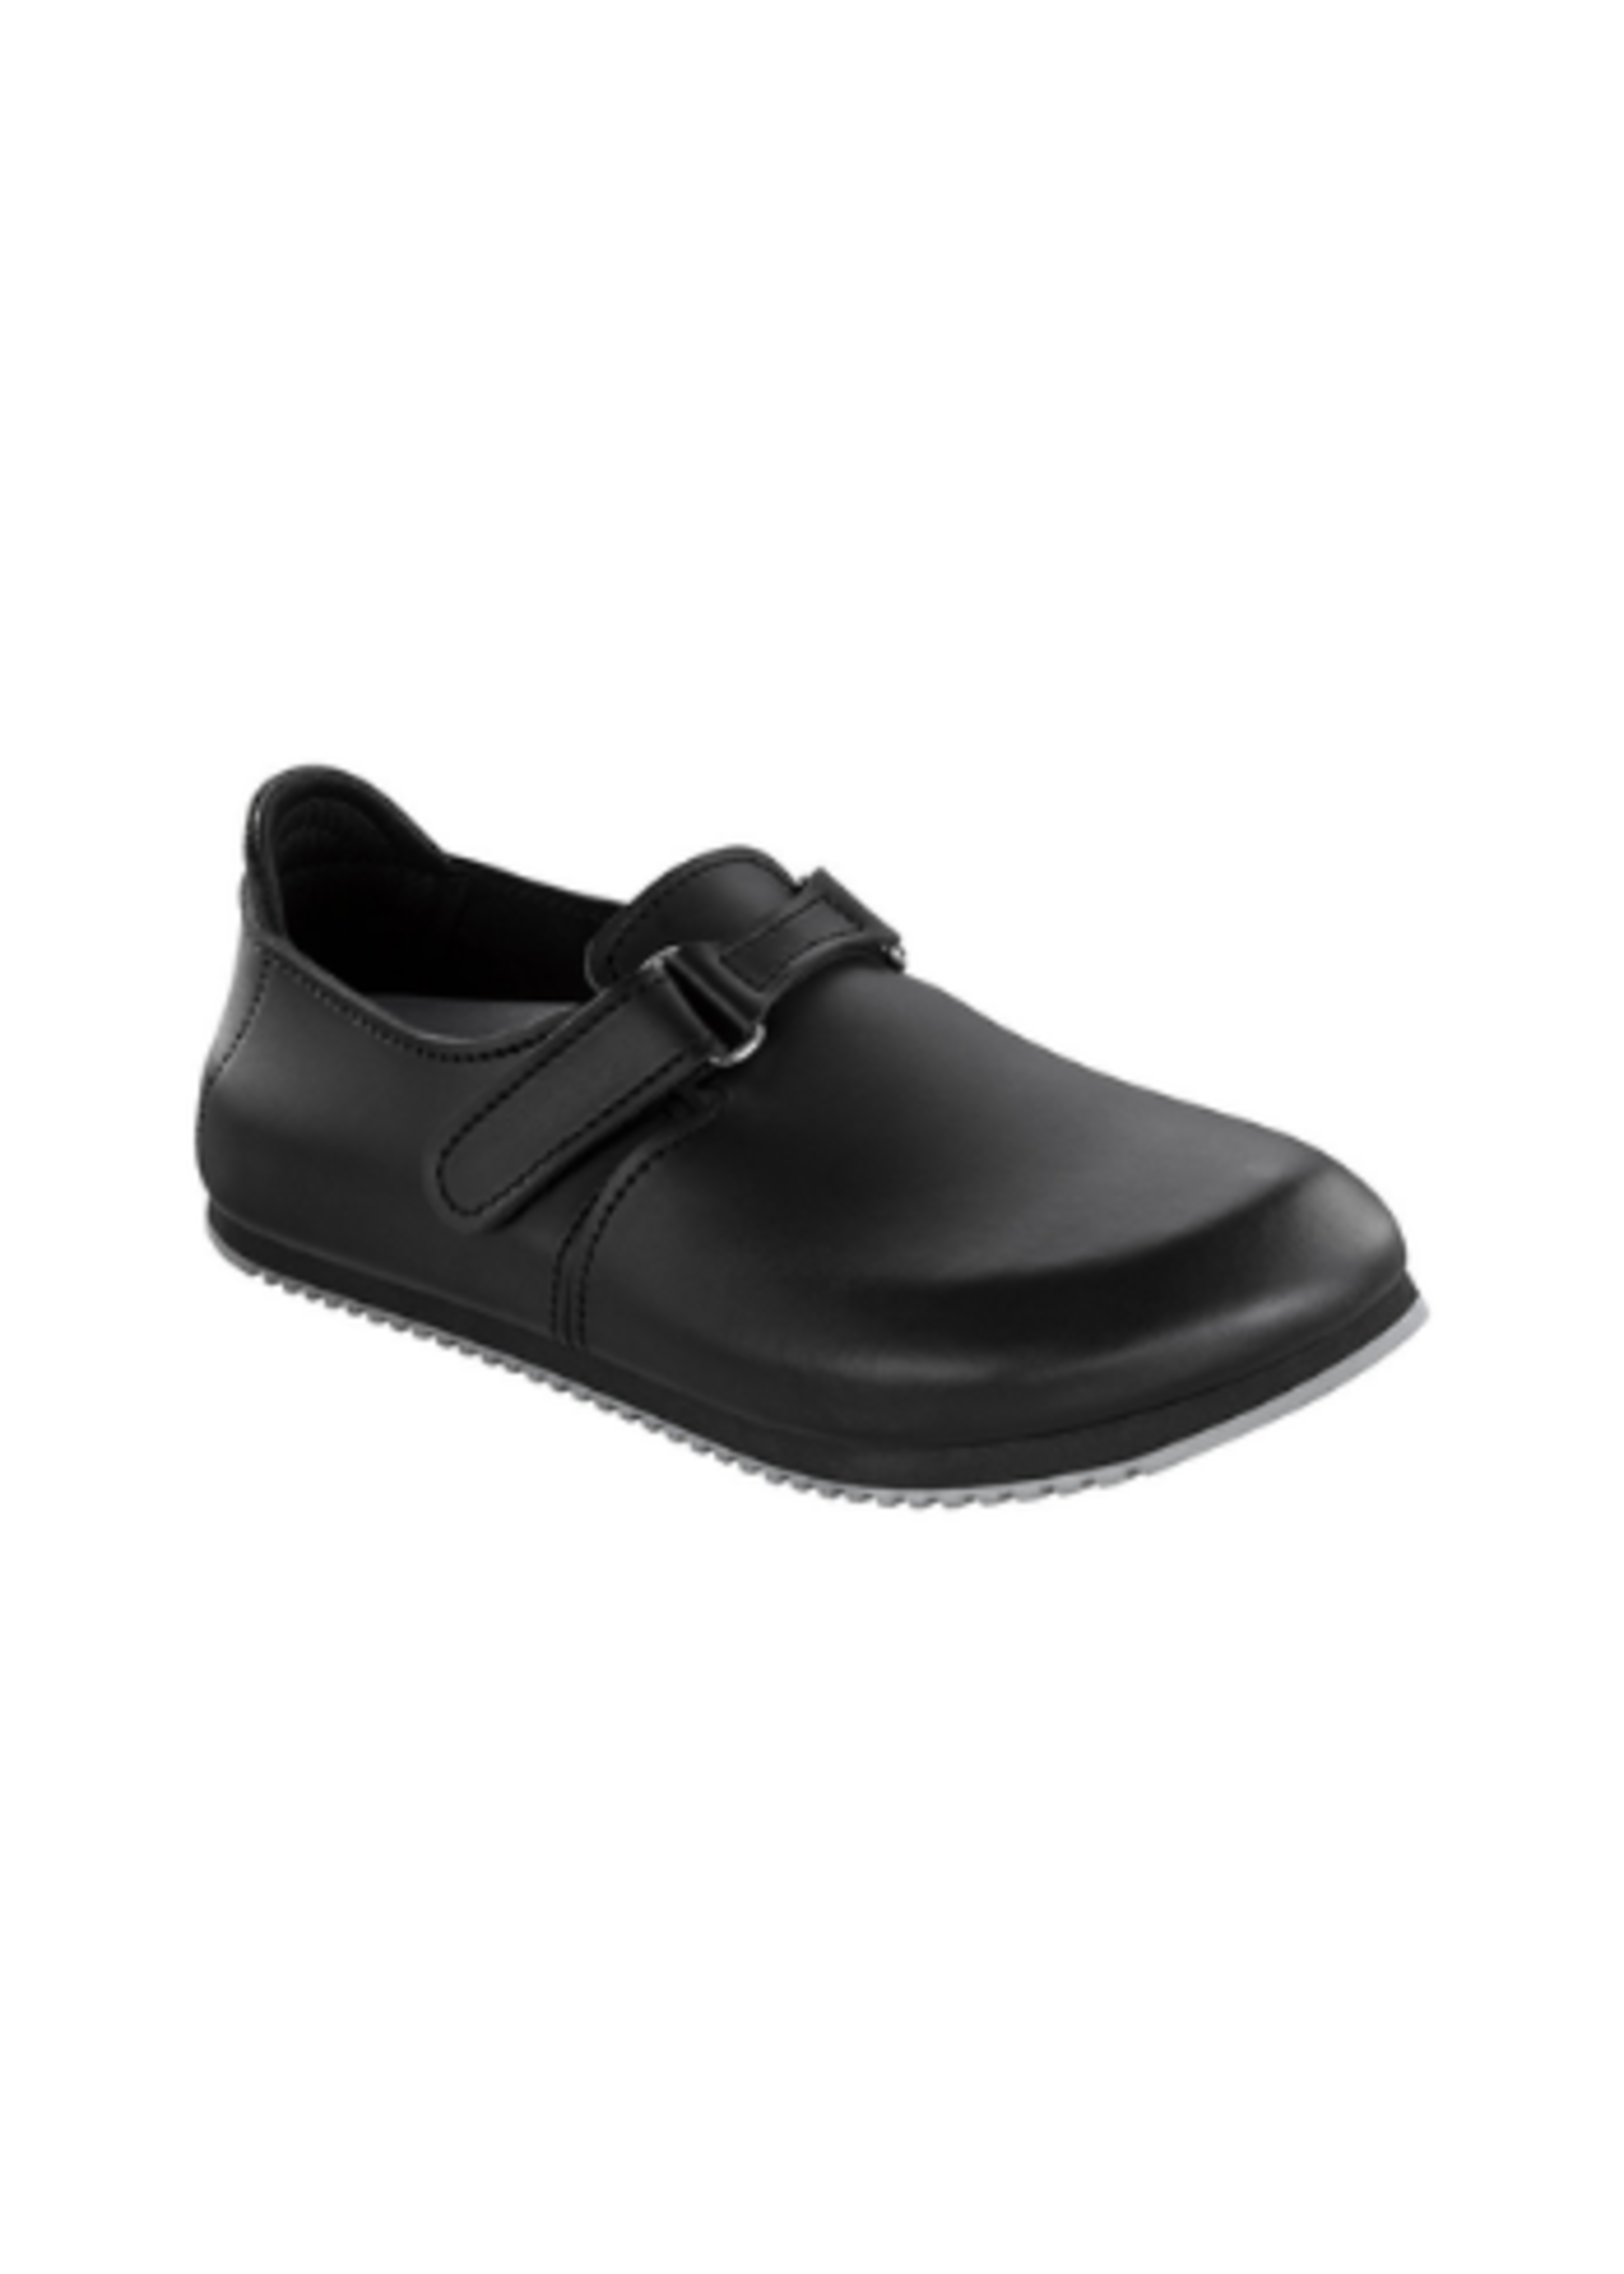 Birkenstock Linz - Smooth Leather in Black (Classic Footbed - Supergrip Sole)